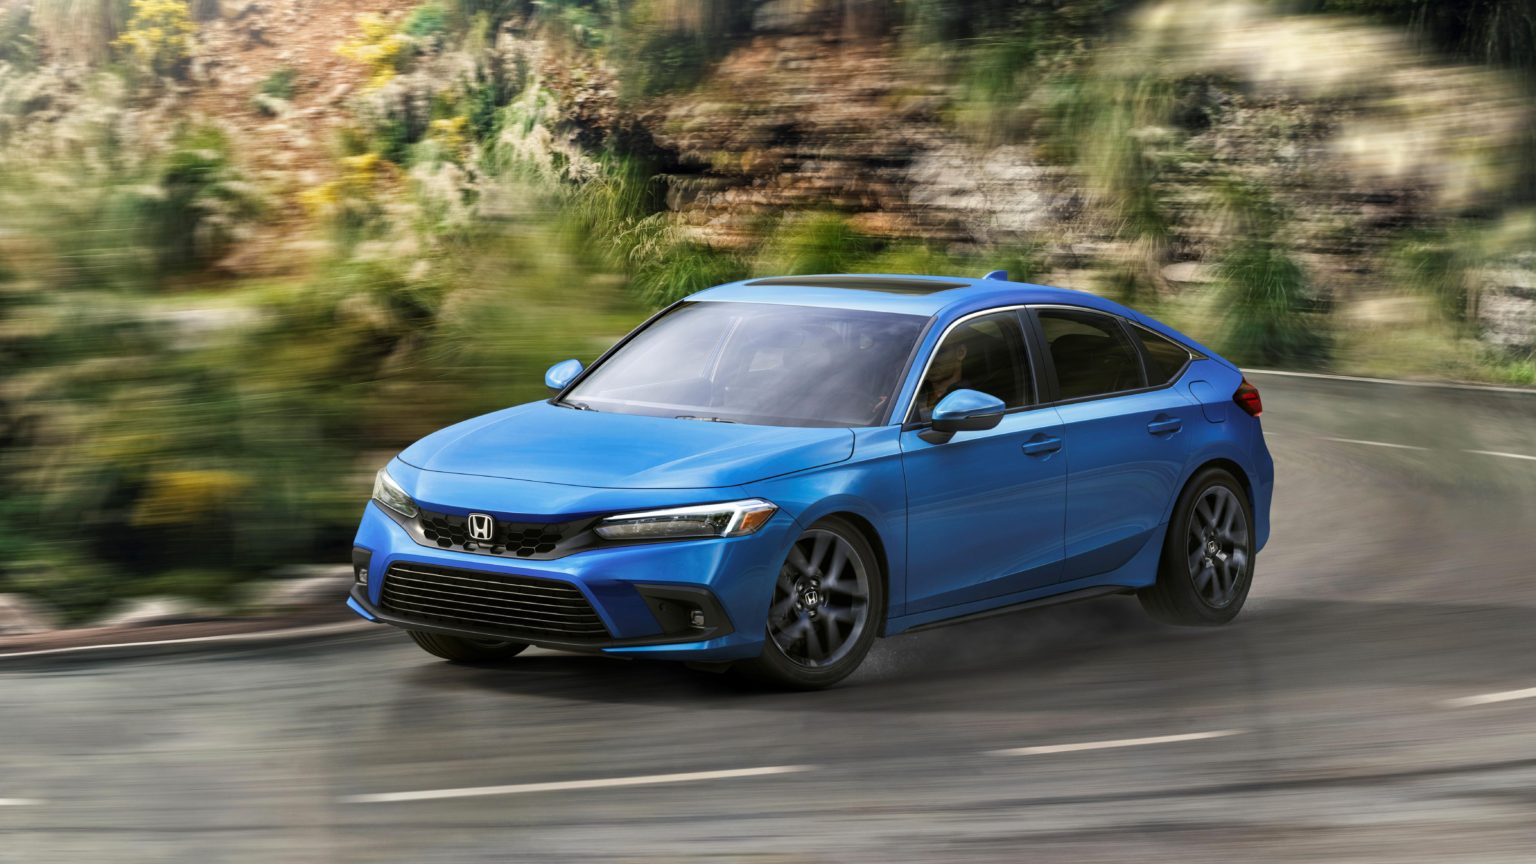 The 2022 Civic Hatchback features a sweeping shape.